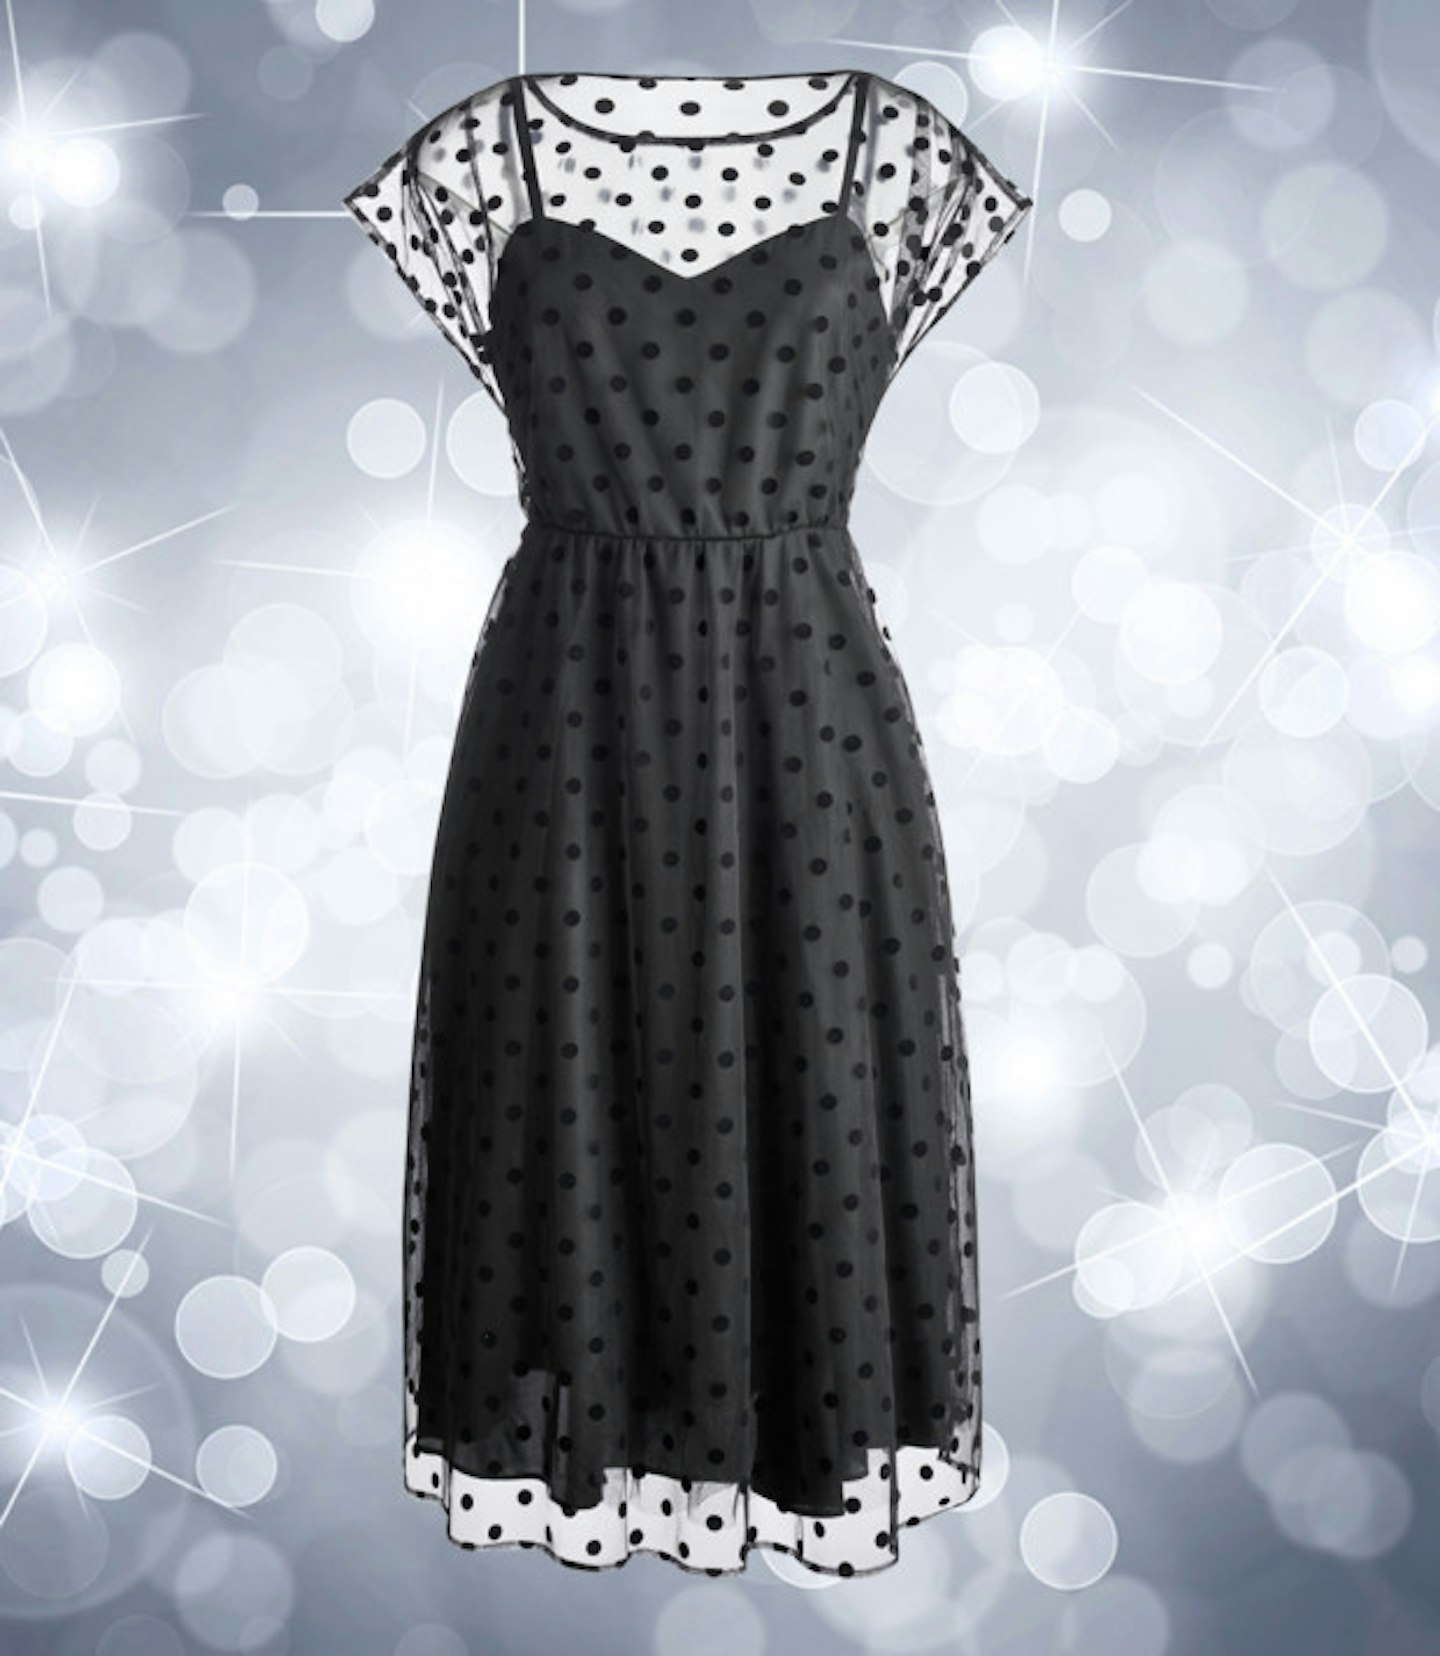 party-dresses-simply-be-claire-richards-polka-dot-black-dress